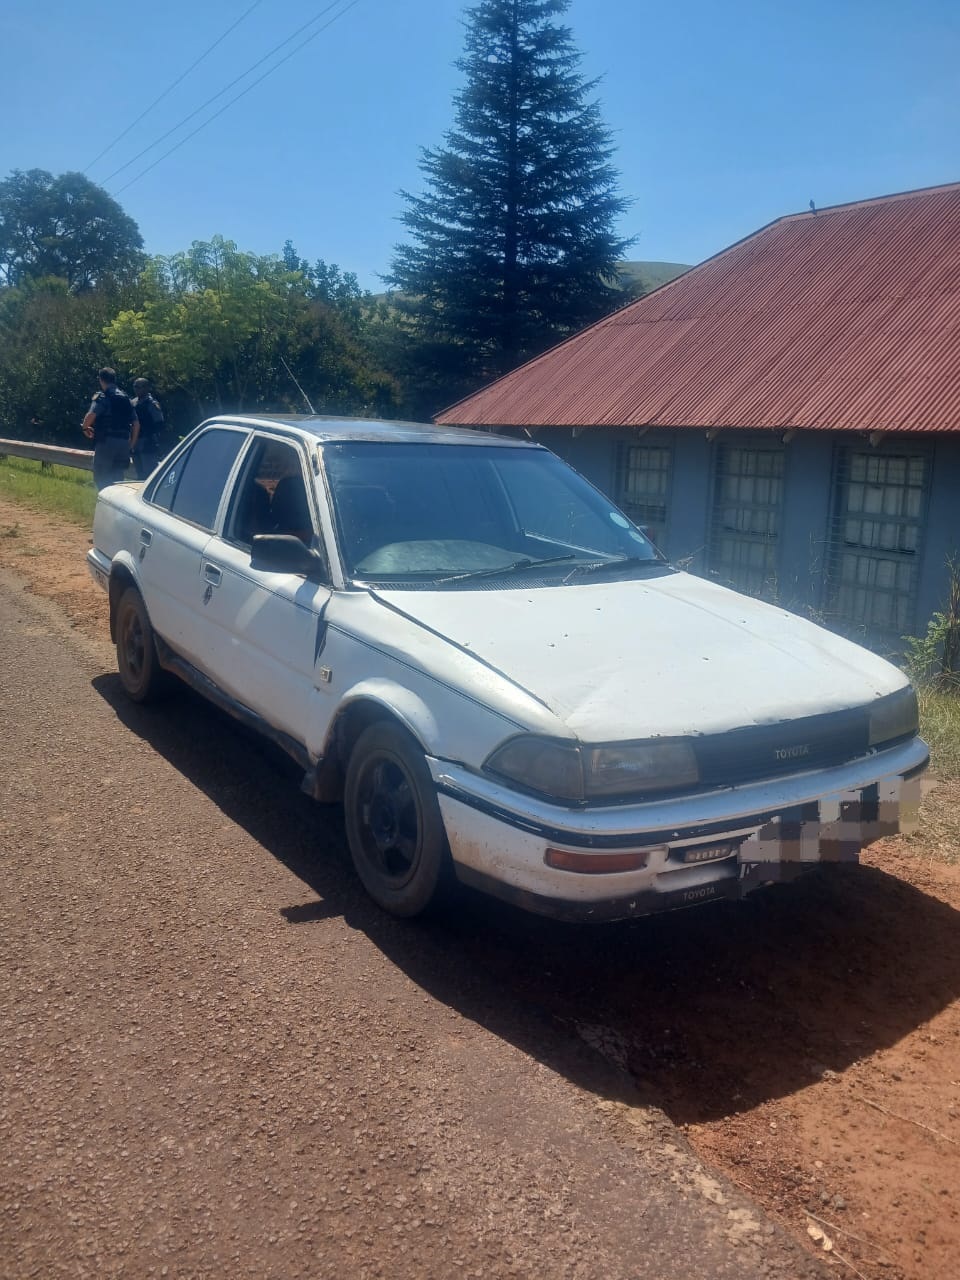 The car was found in Mpumalanga after 14 years. 